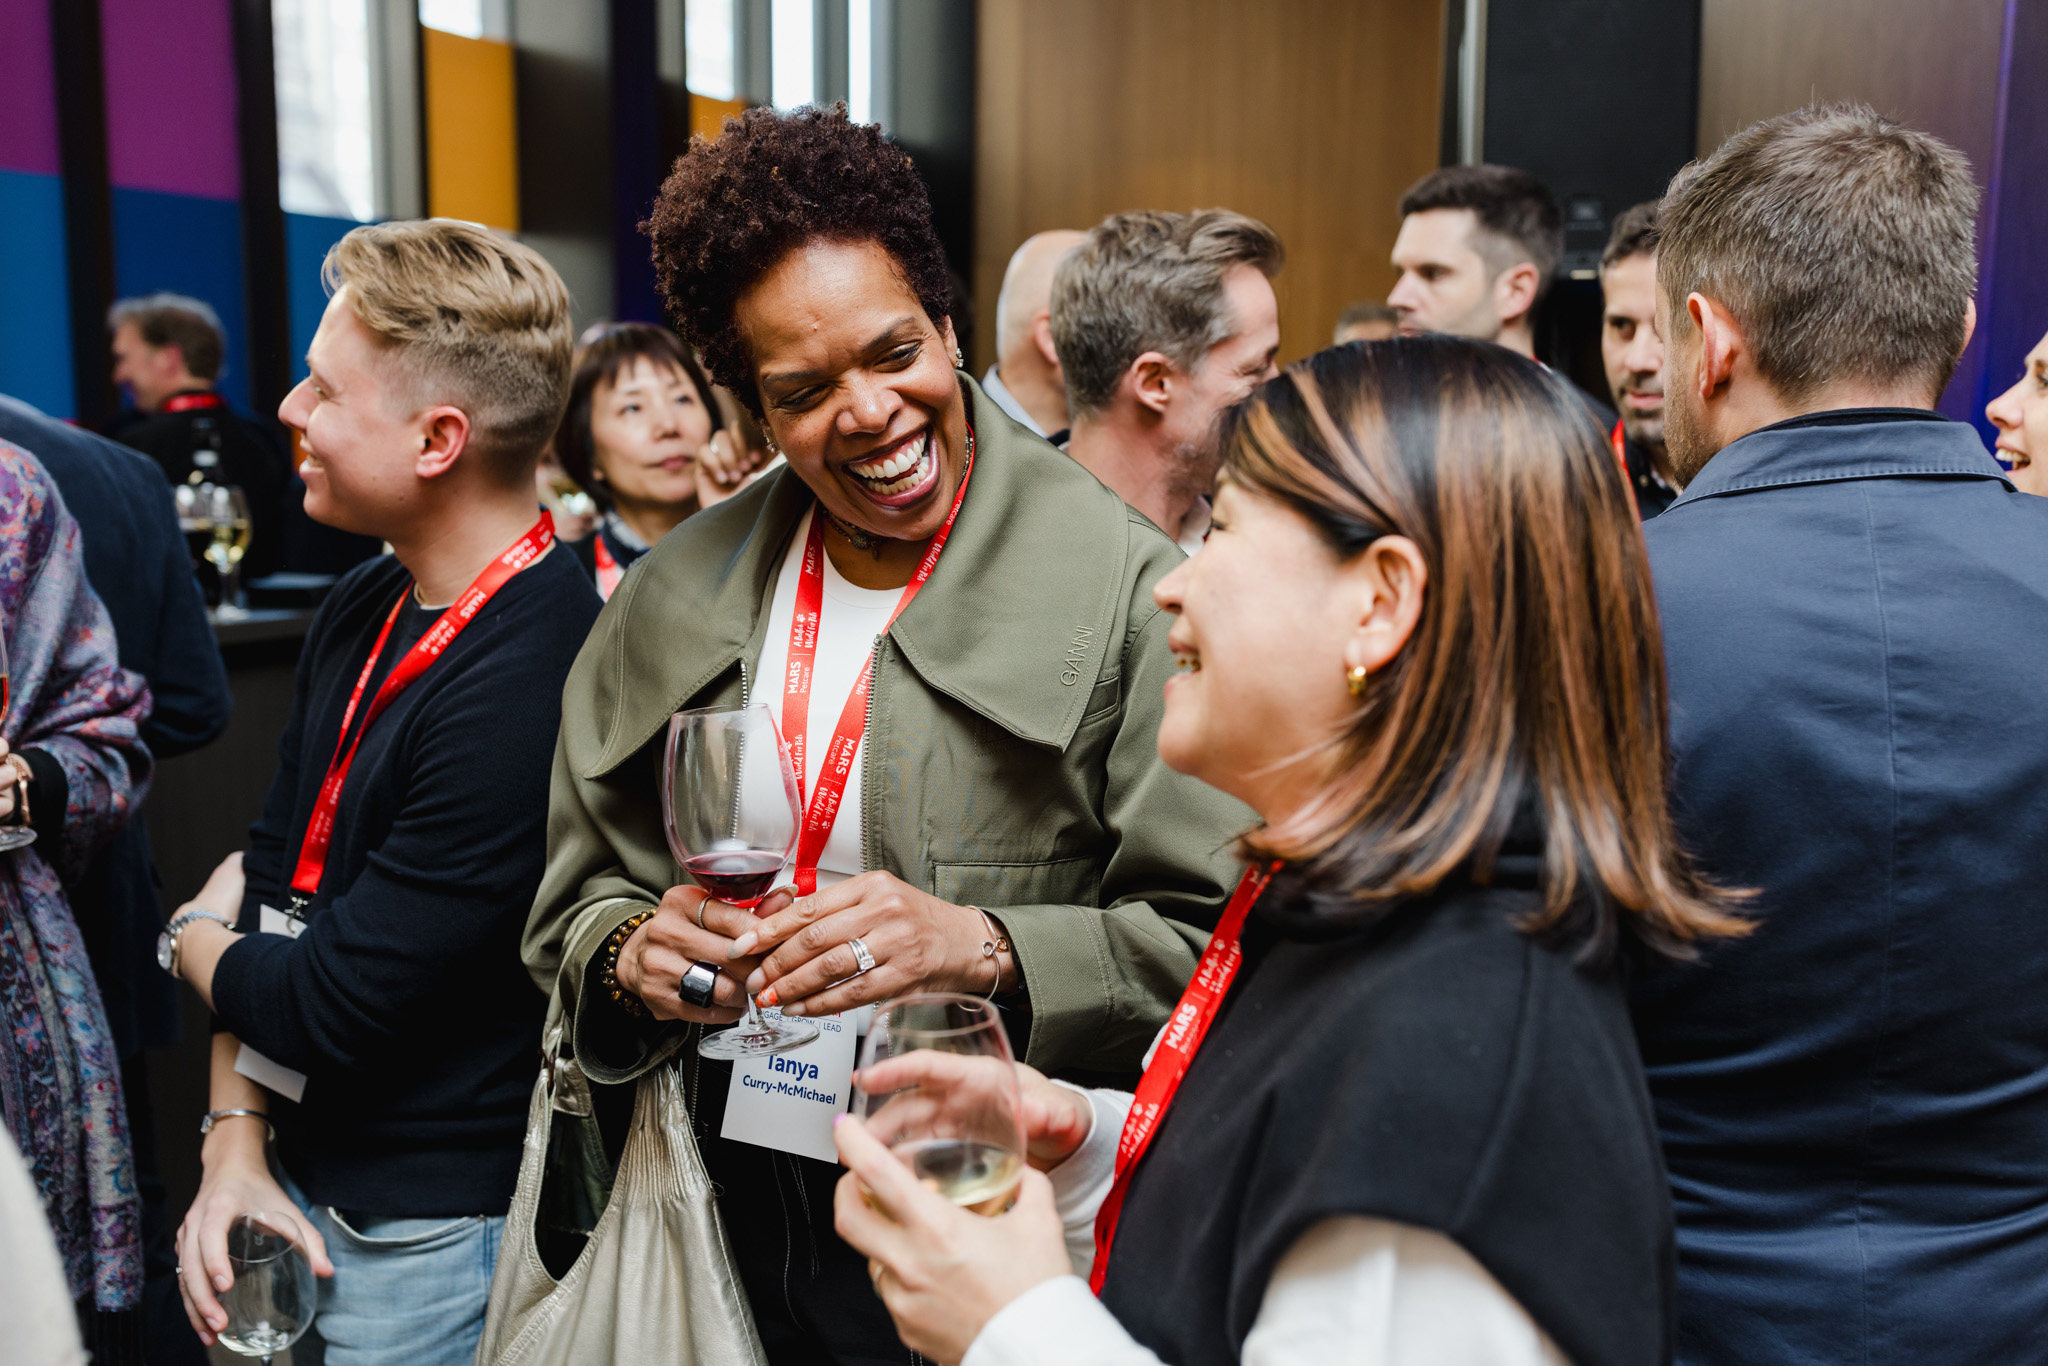 A group of people, wearing ID badges and holding drinks, engage in lively conversation at a networking event, perfect for corporate photography.